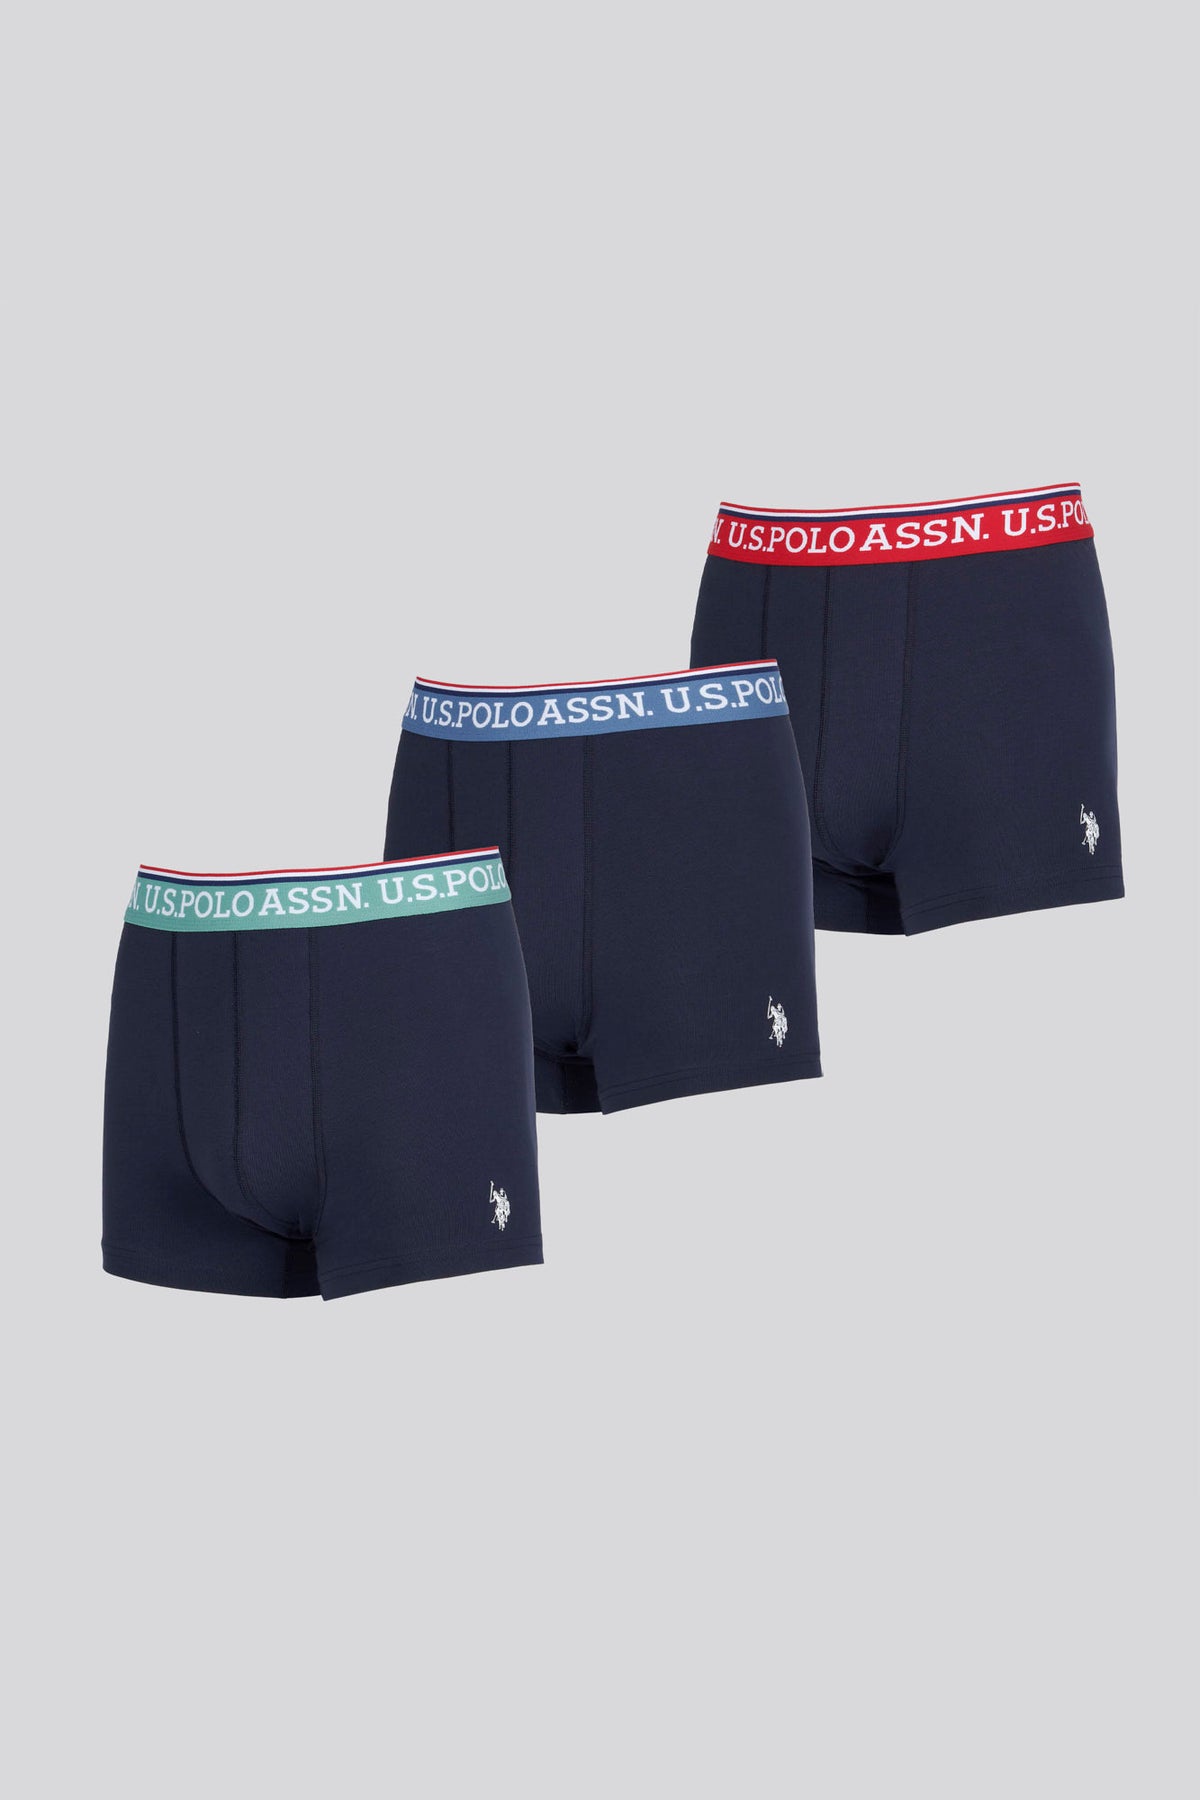 Dharmis Fashion on X: U.S. POLO ASSN. Mens Innerwear collection offers a  consortium of briefs, boxer briefs, trunks & boxer shorts and vests. Buy  Now:  #Mensbrief #Bikinibrief #USPOLO #Innerwear  #BoxerBriefs #DharmisFashion #